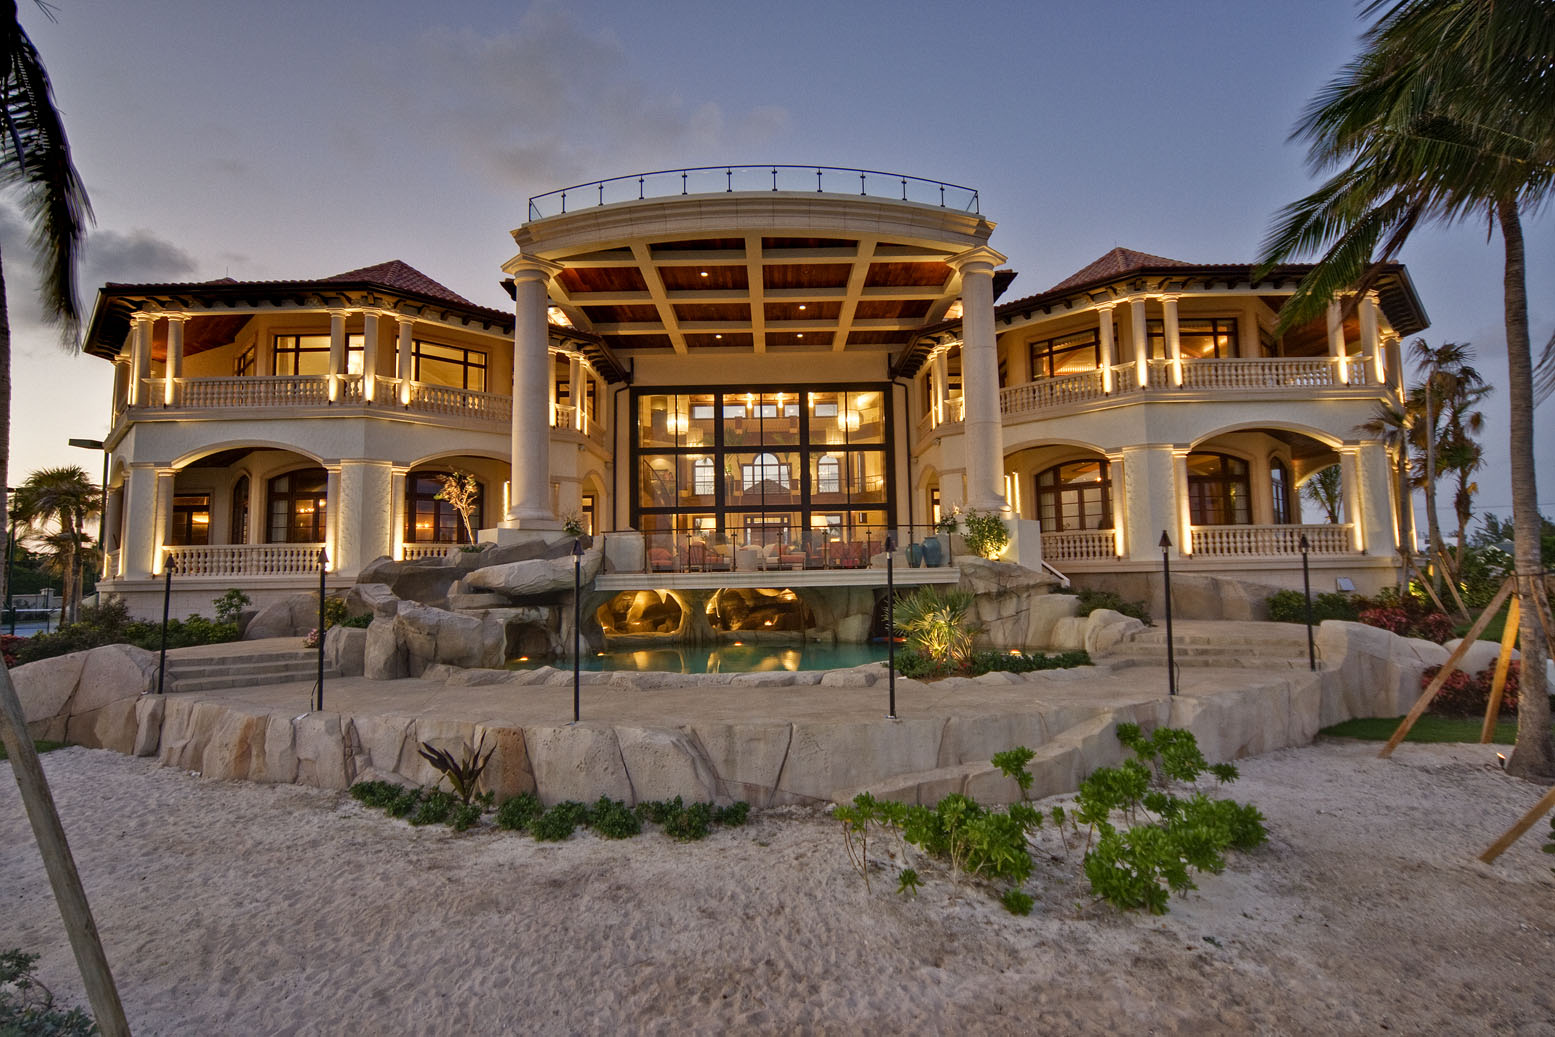 Cayman Islands MegaMansion  Homes of the Rich